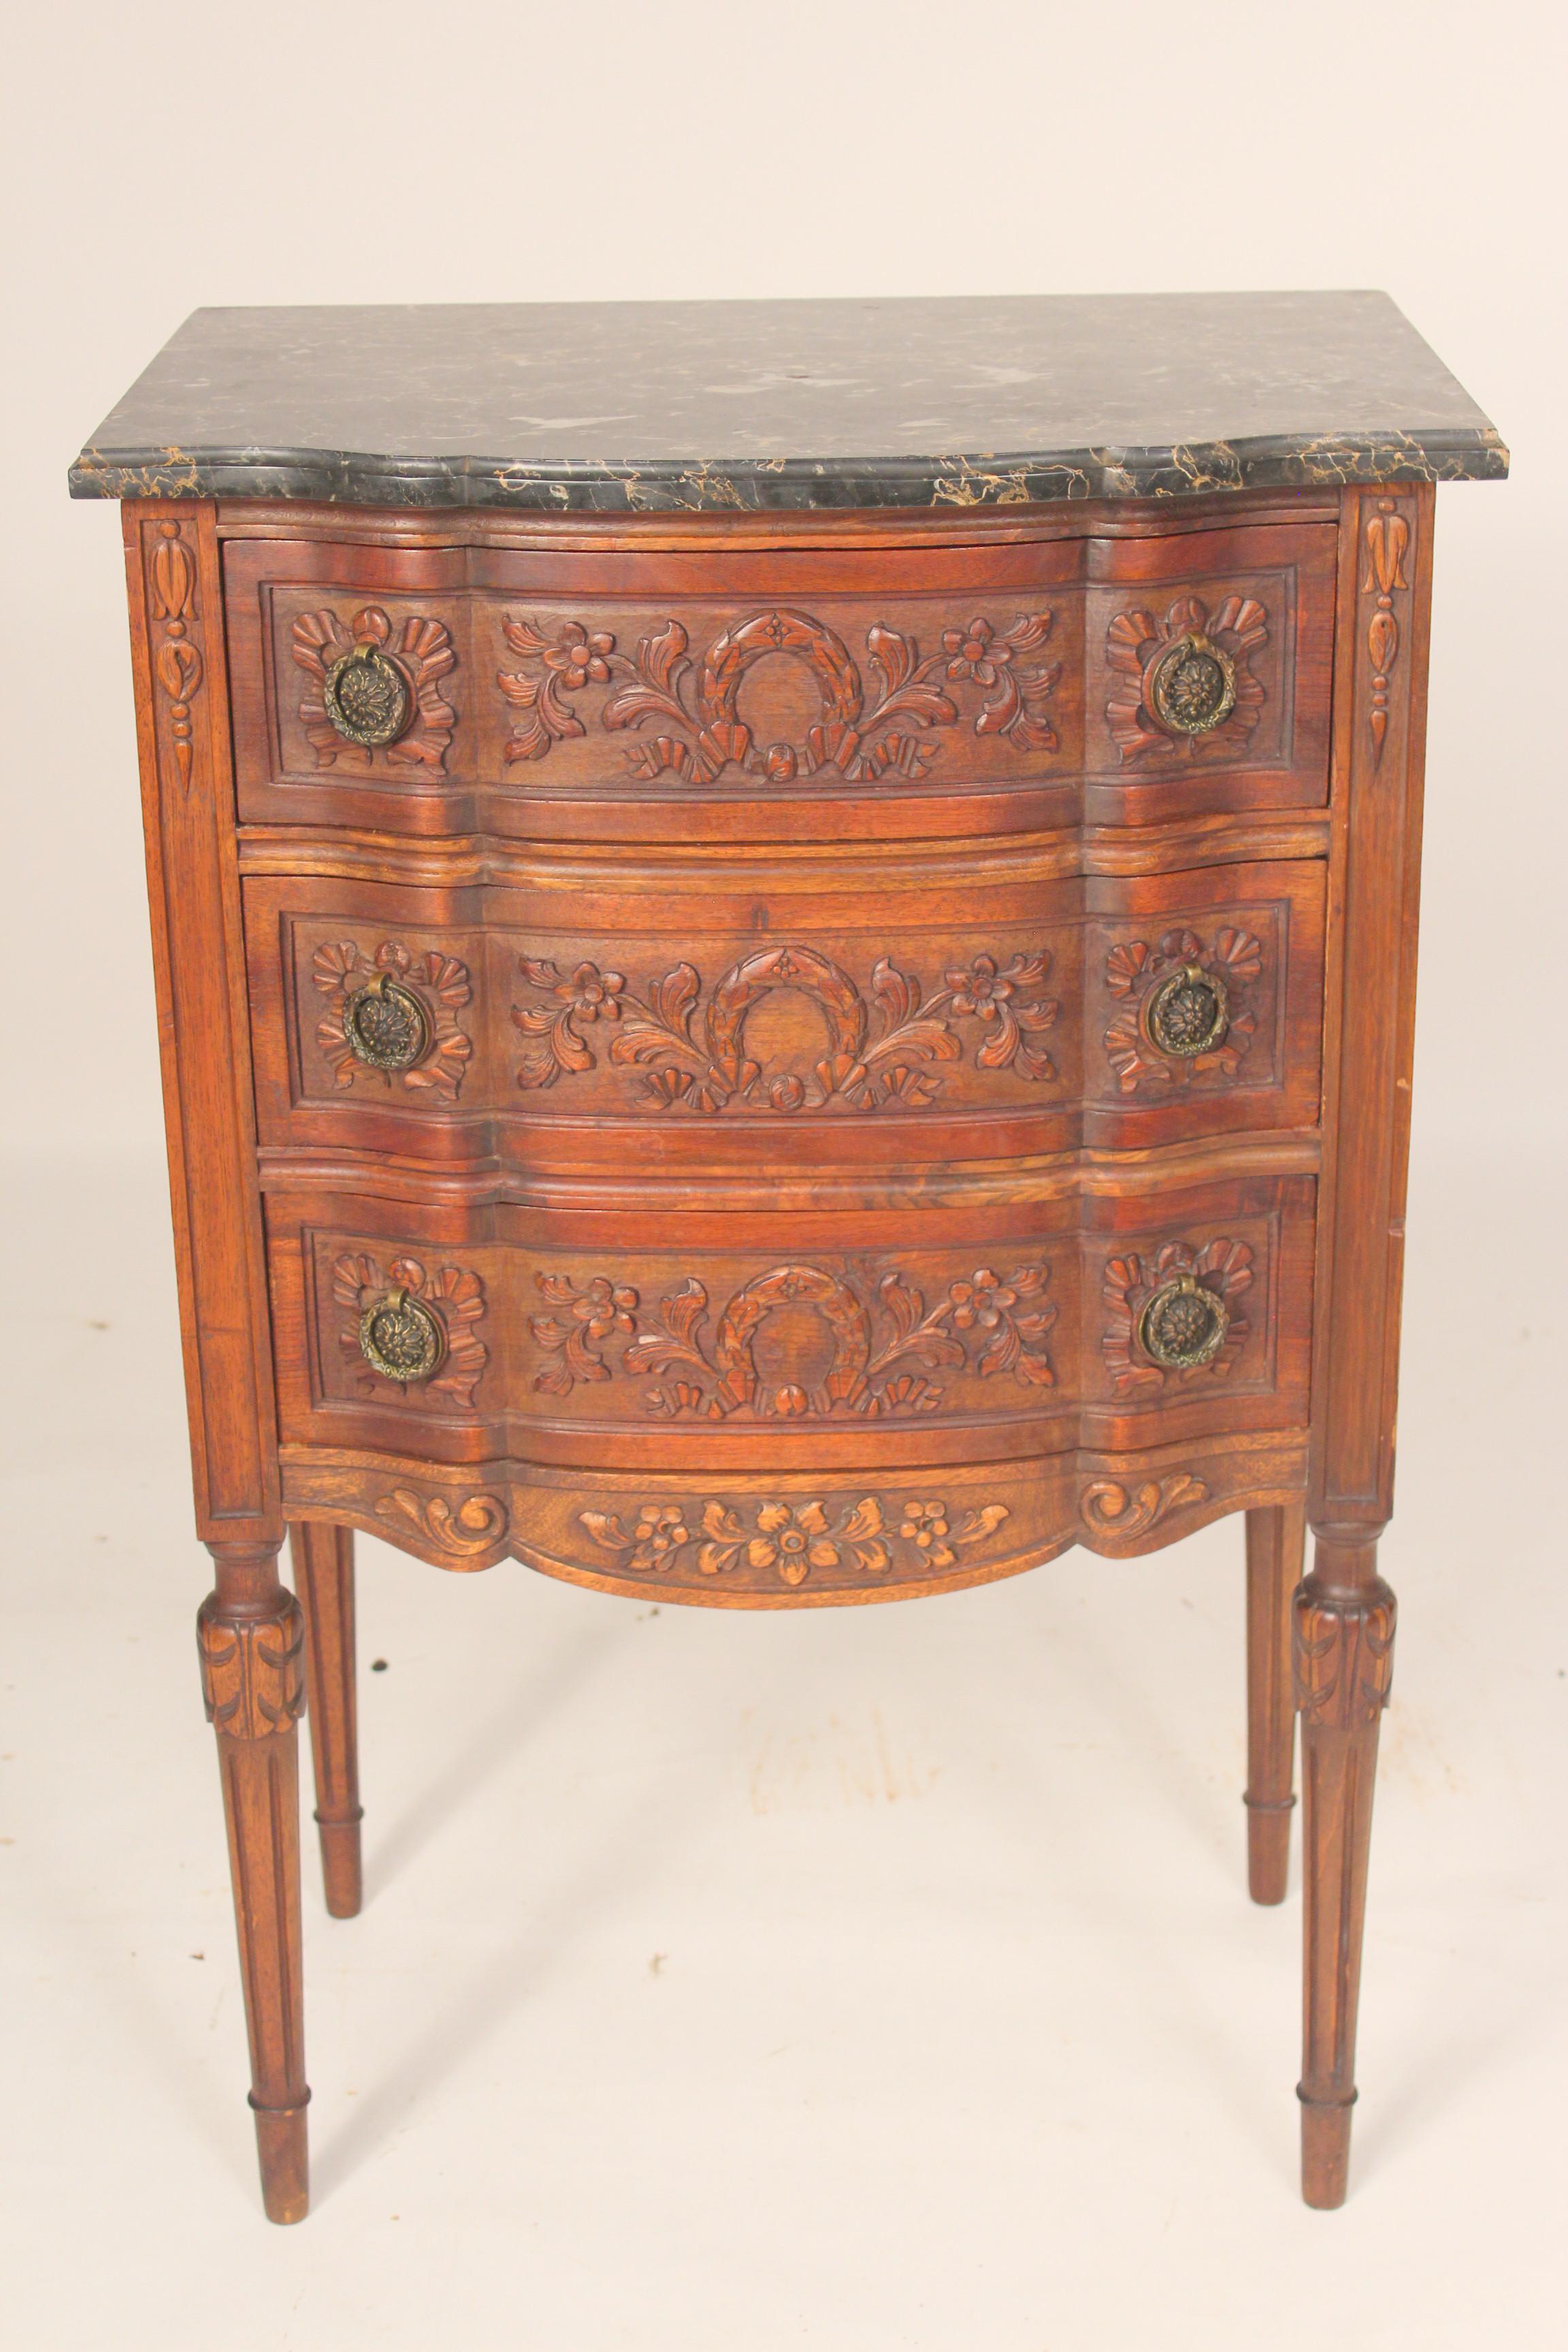 Louis XVI style carved walnut chest of drawers with marble top, circa 1920.